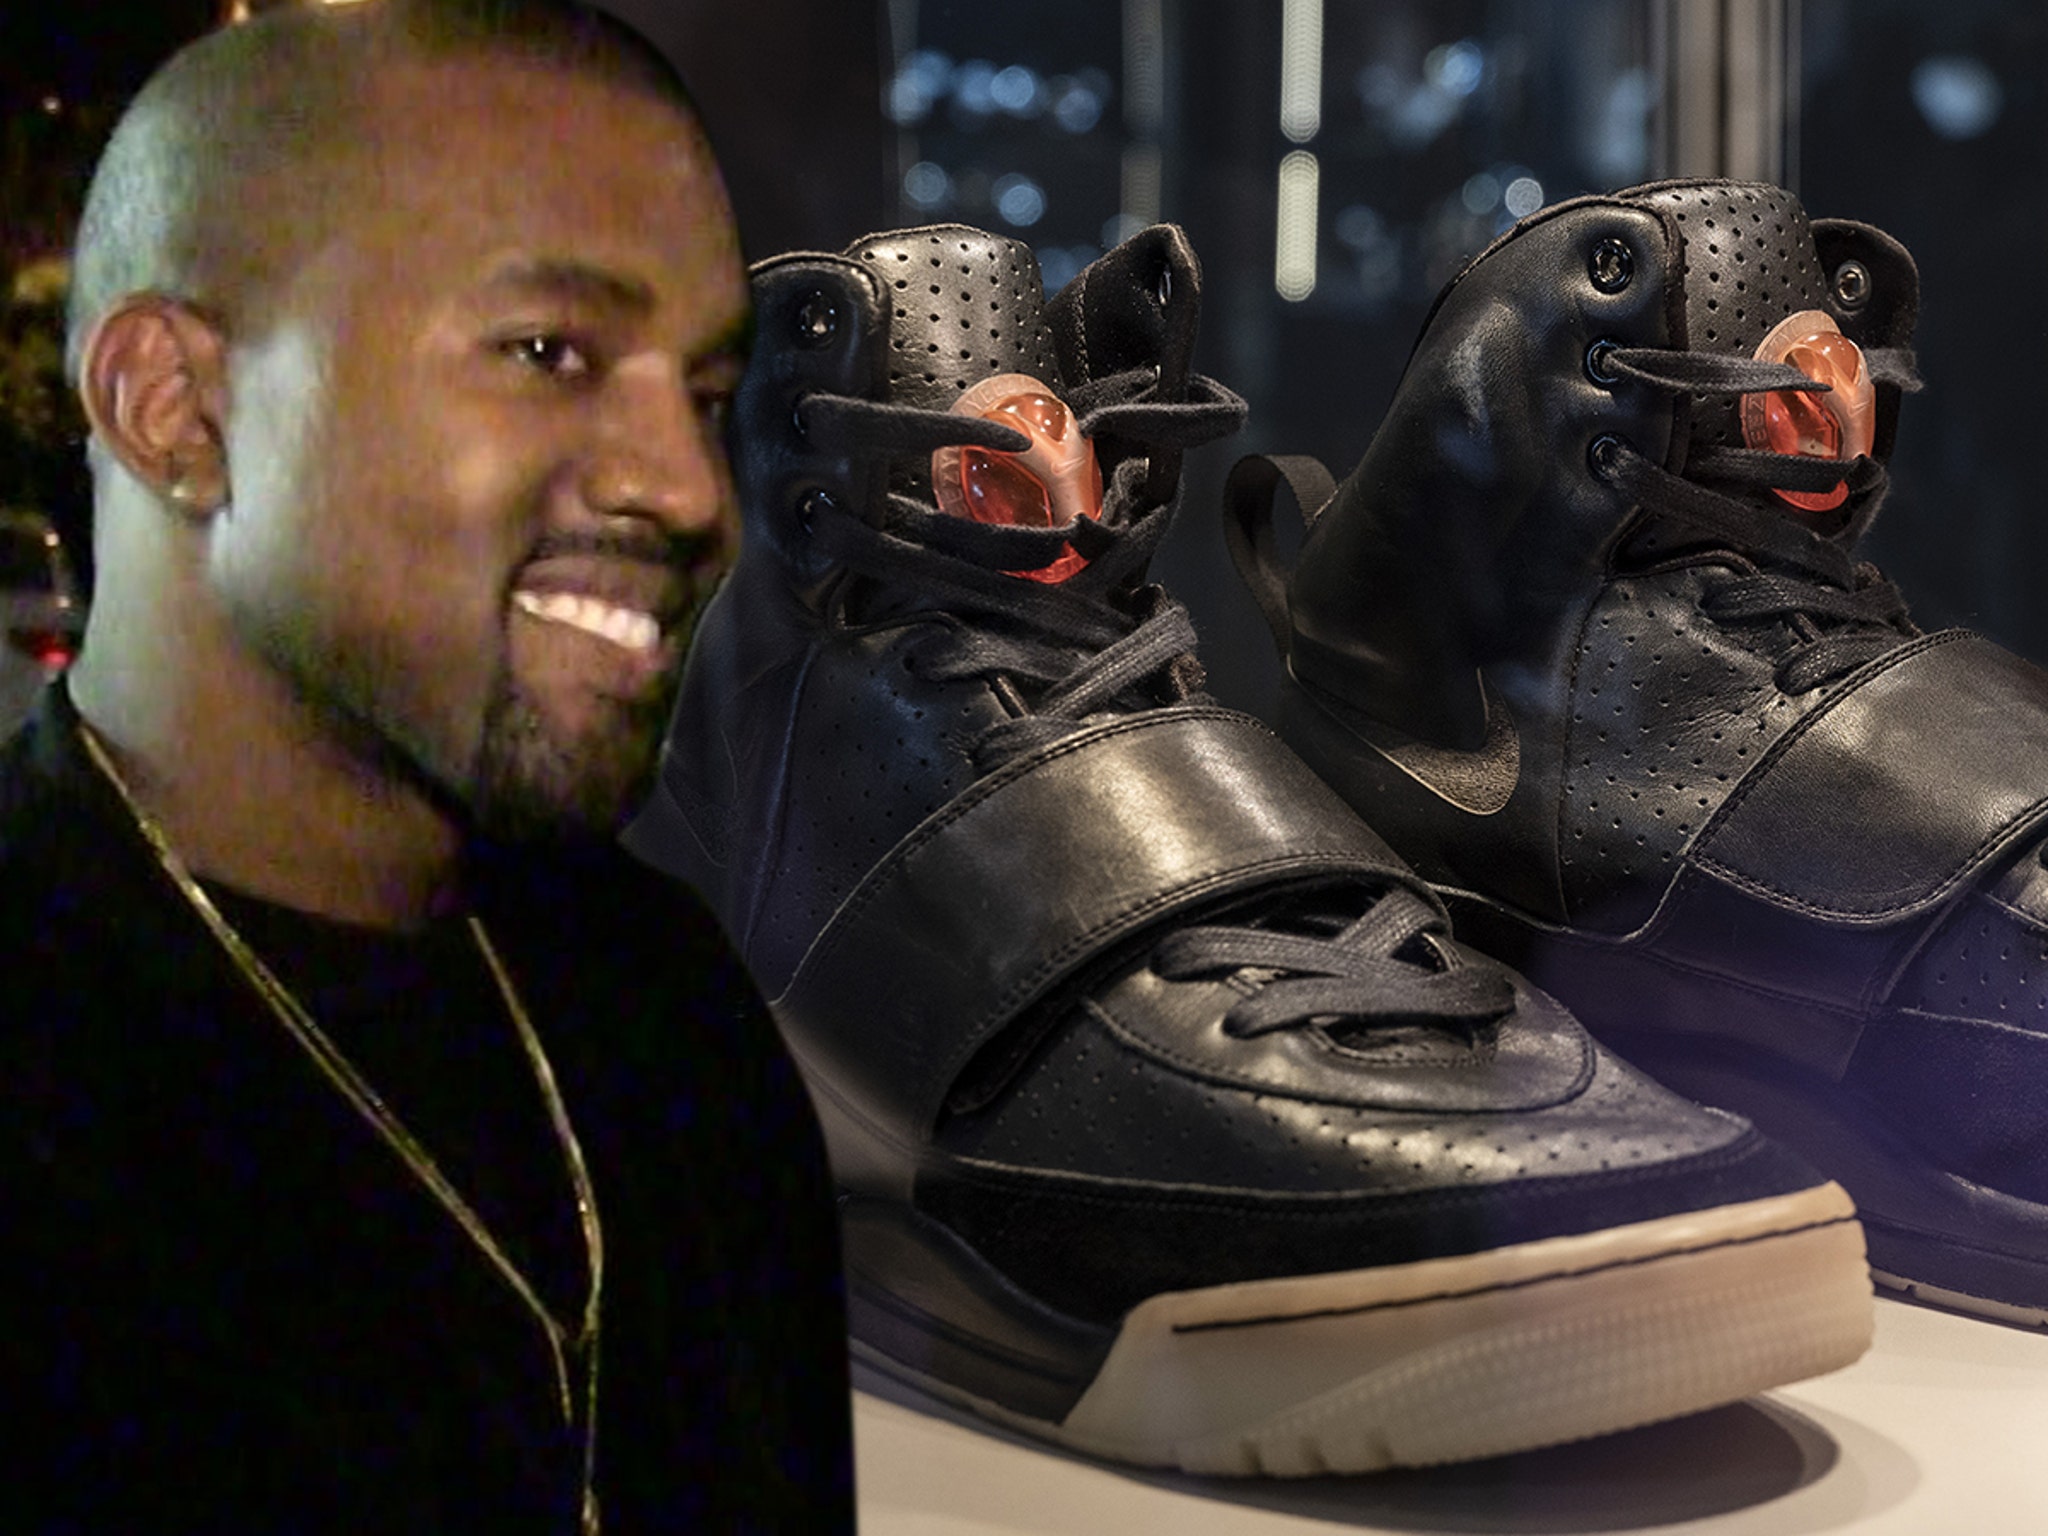 The Top 10 Most Expensive Yeezy Shoes Ever Sold